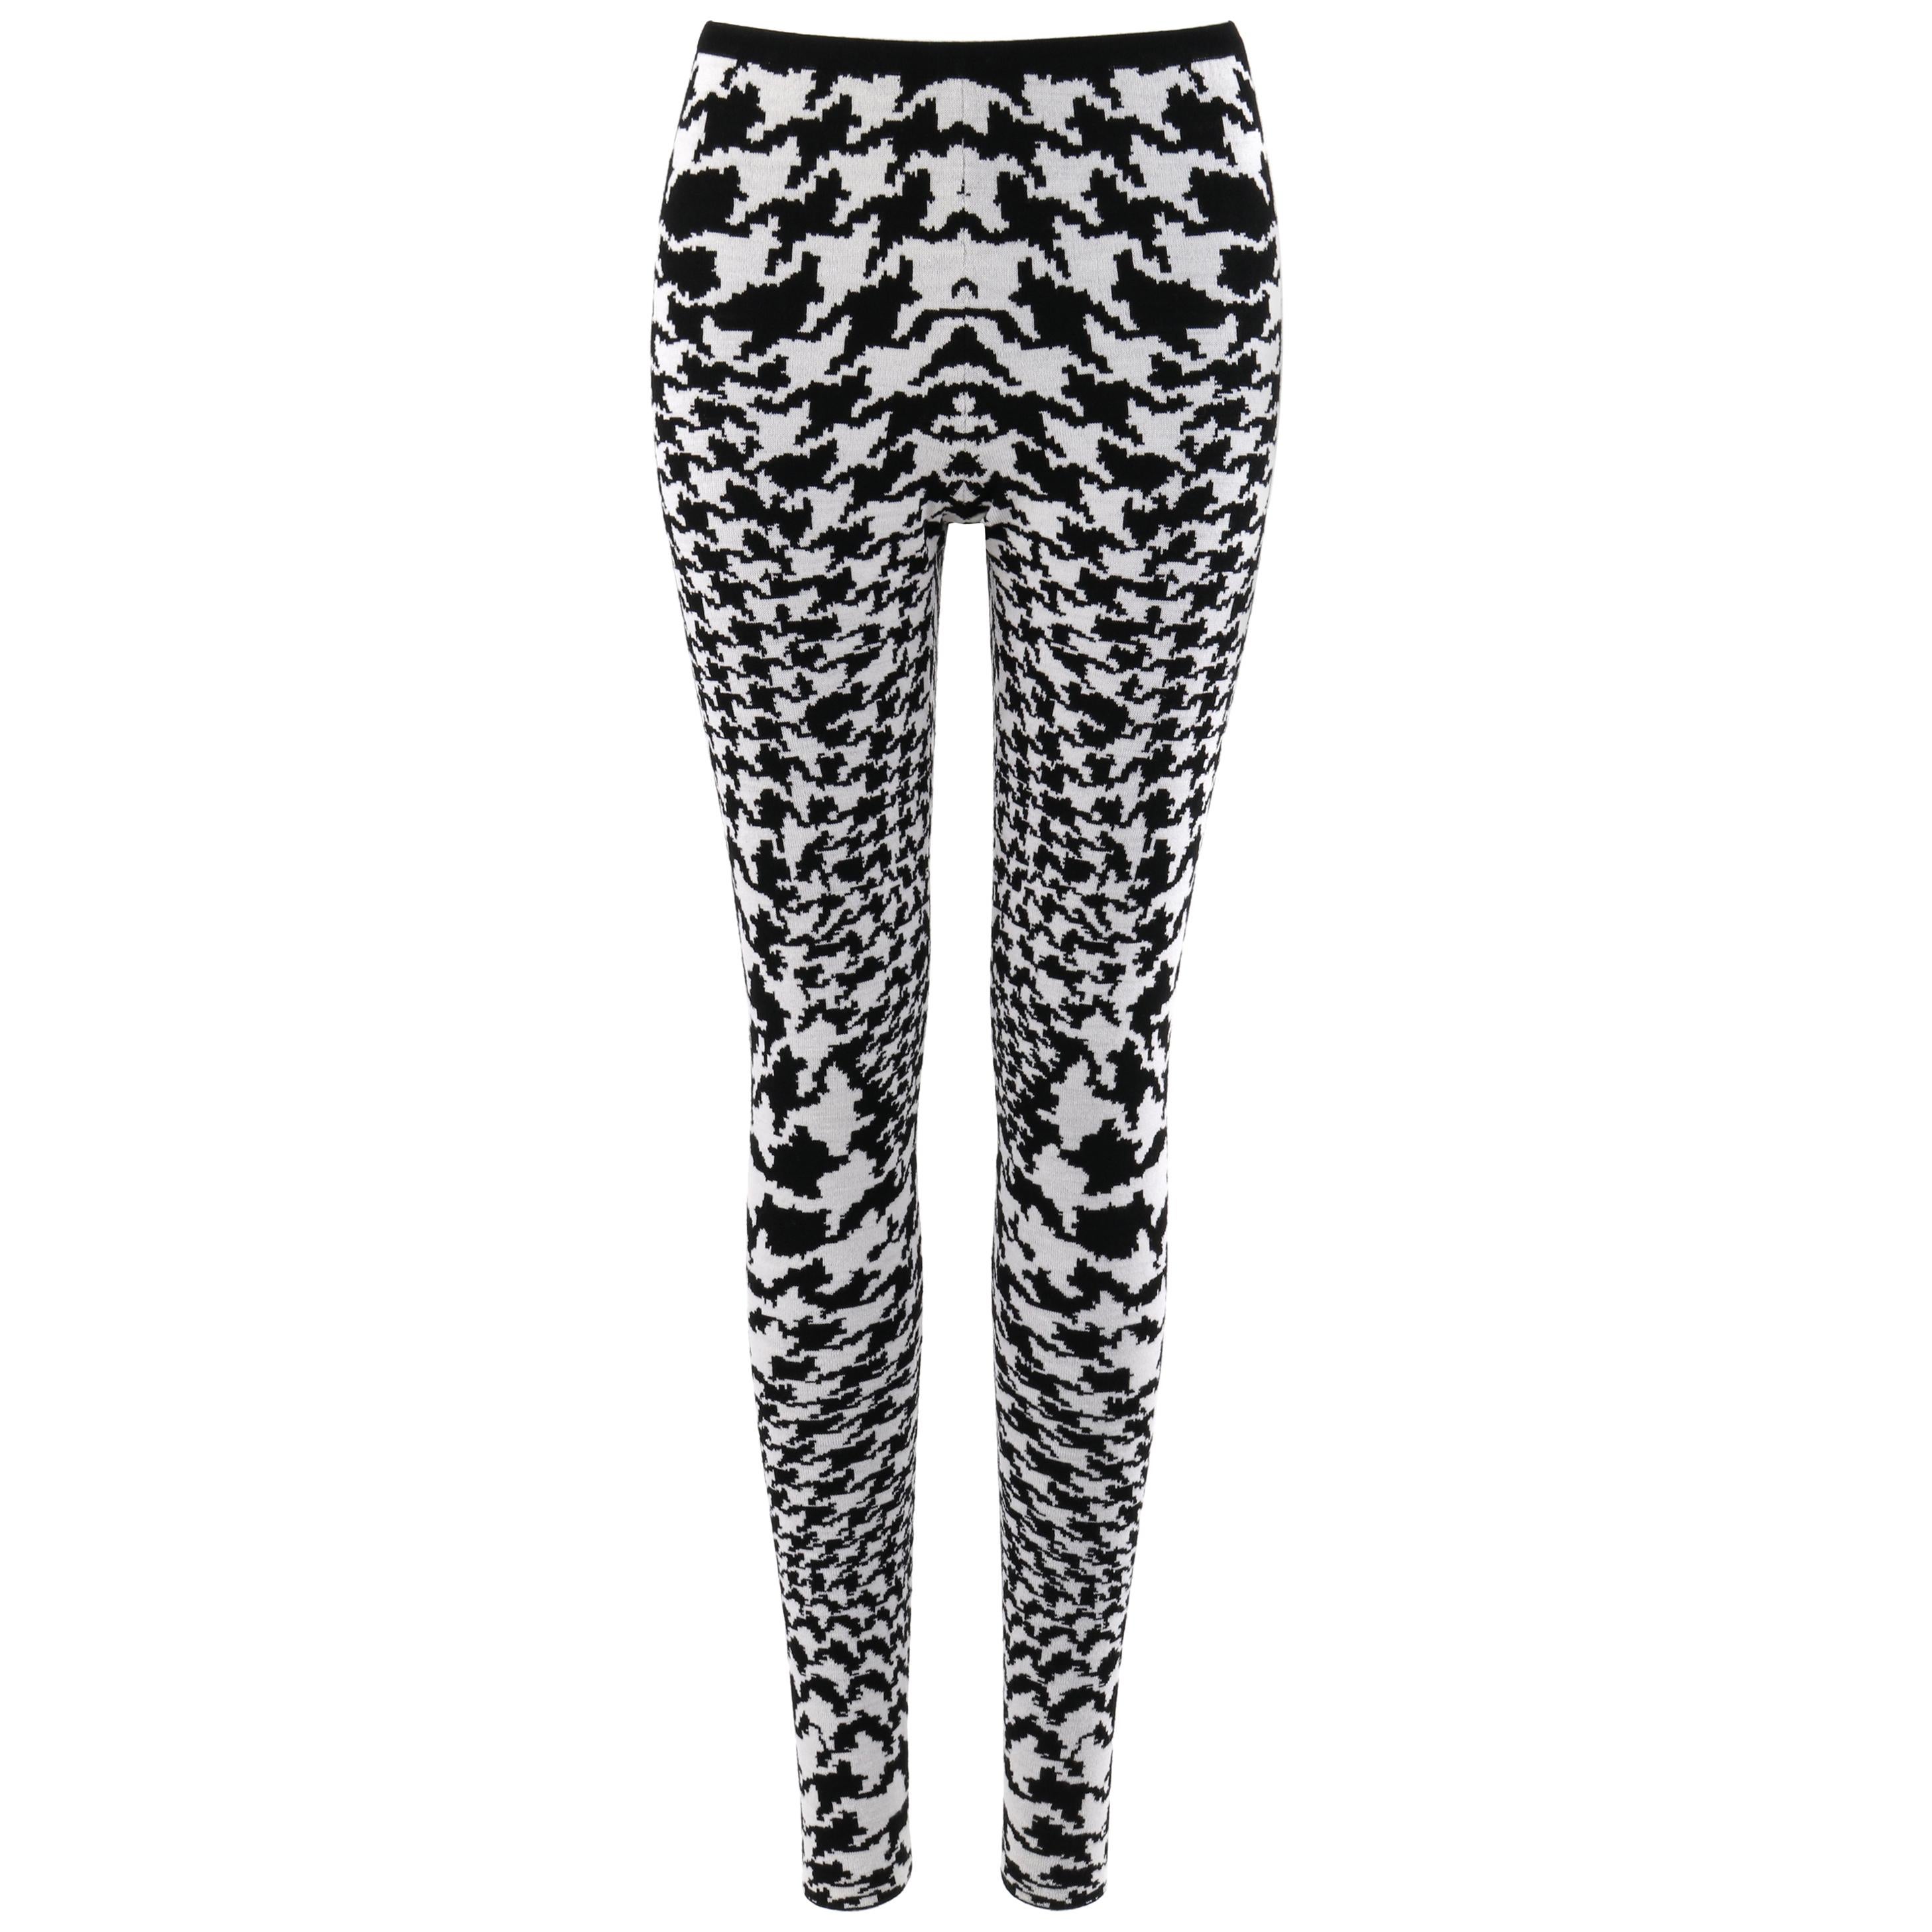 ALEXANDER McQUEEN A/W 2009 “The Horn Of Plenty" Dogtooth Wool Knit Legging Pant For Sale